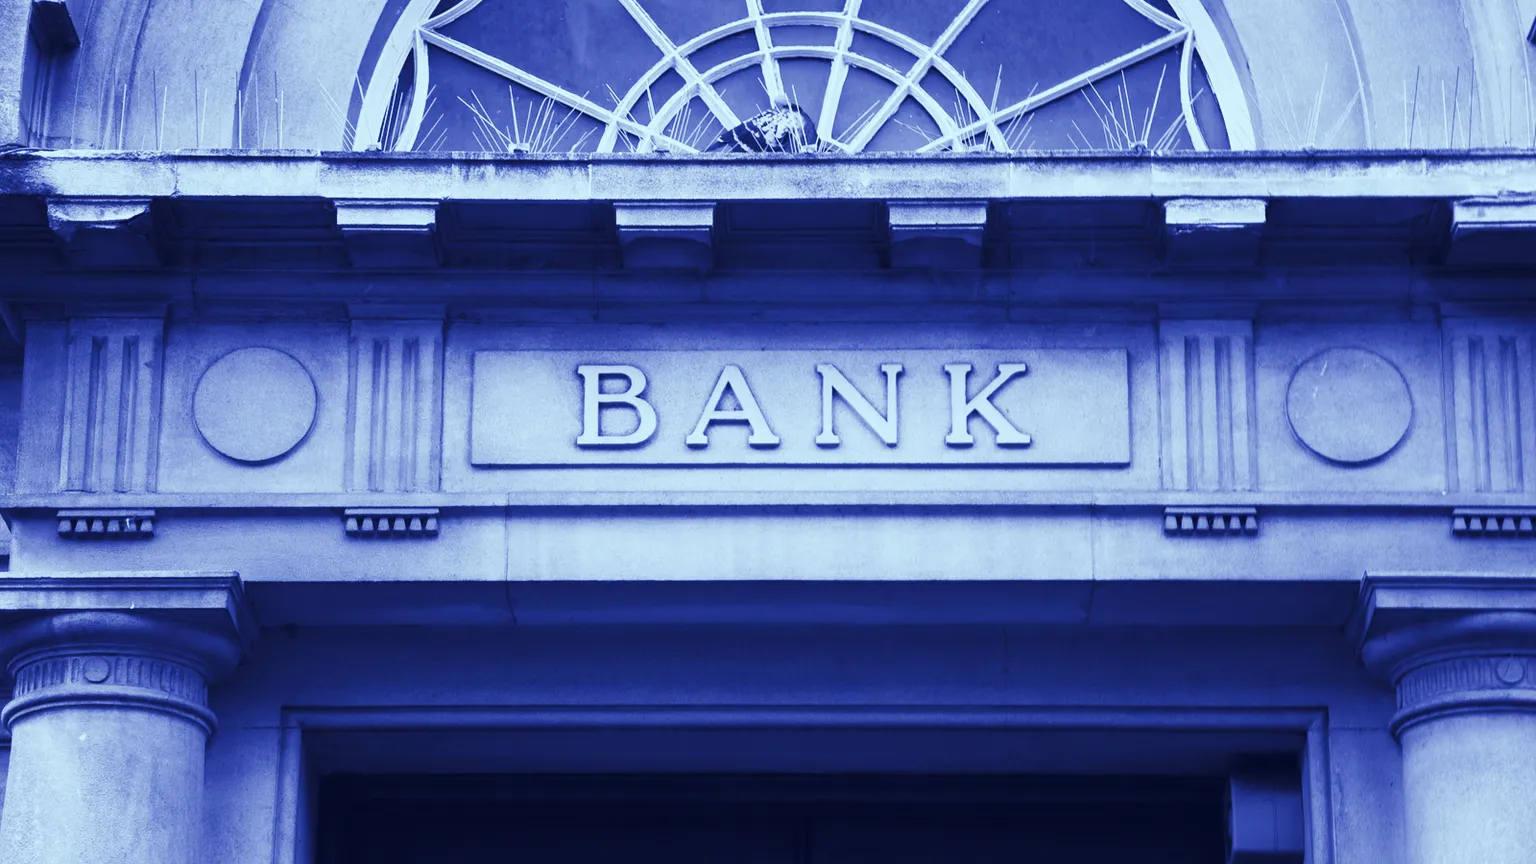 Banks in Europe face major loses due to lockdown. Image: Shutterstock